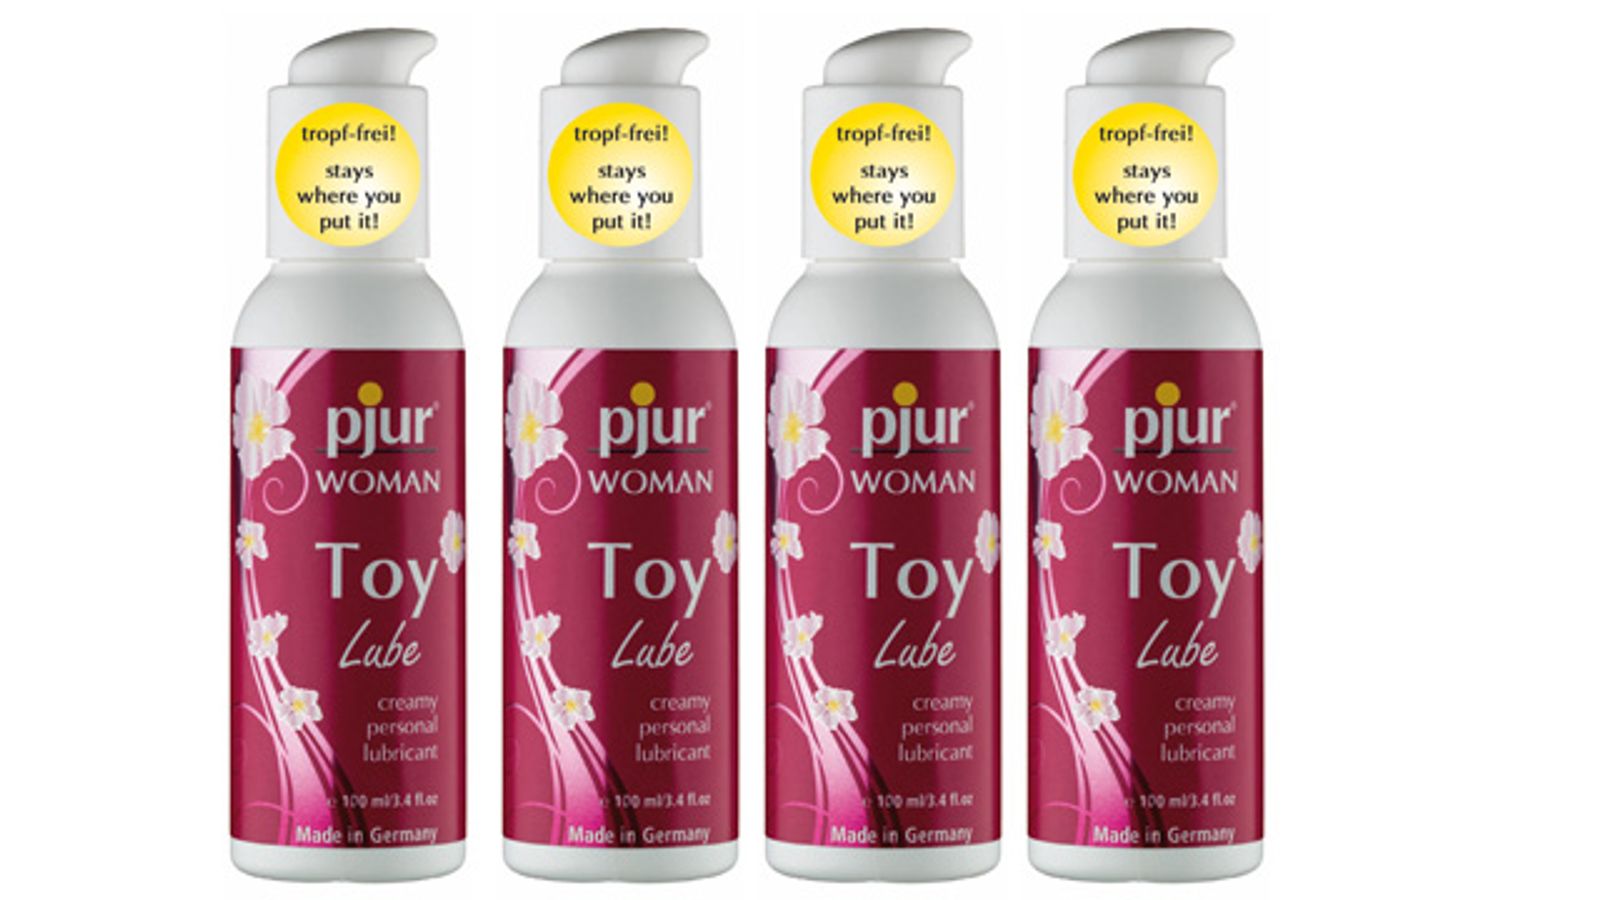 Pjur Woman Toy Lube Excels in Lovetoy Test